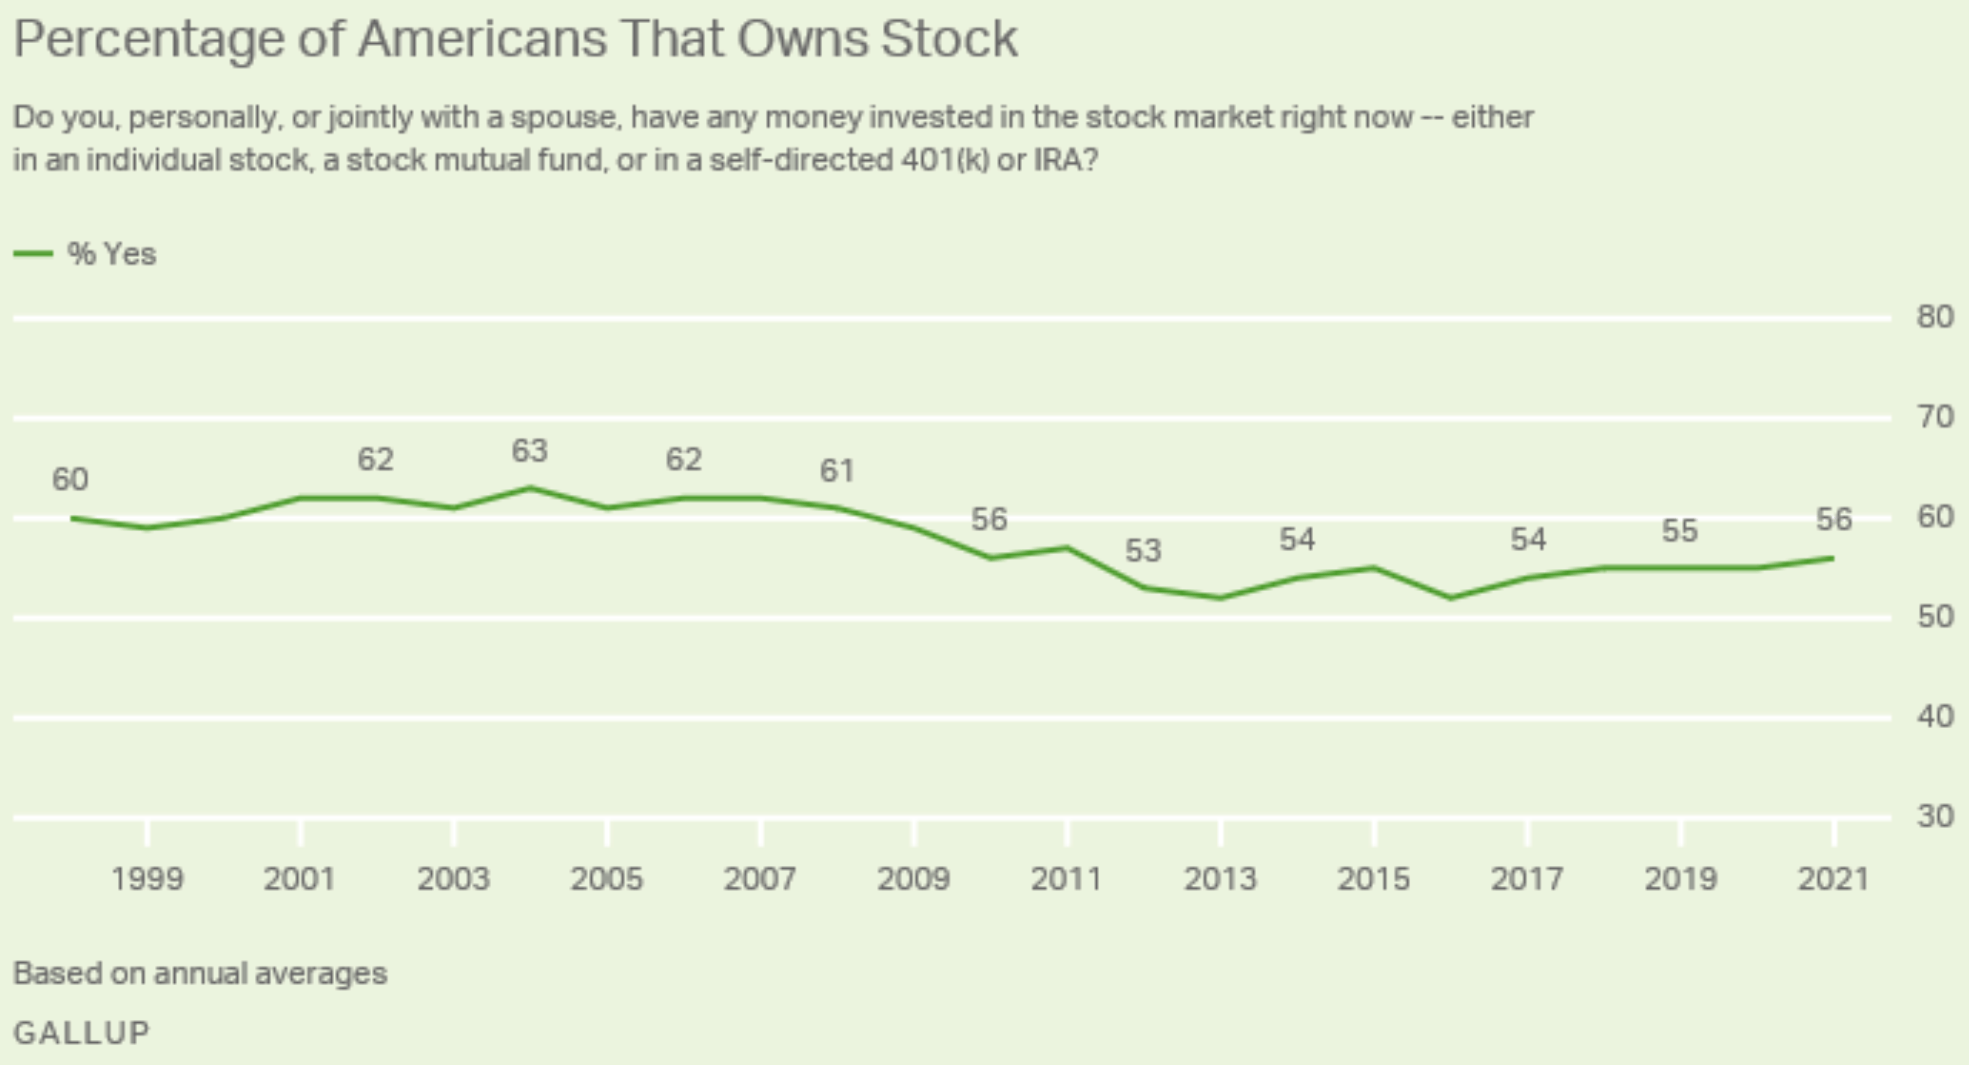 What percentage of Americans own stock